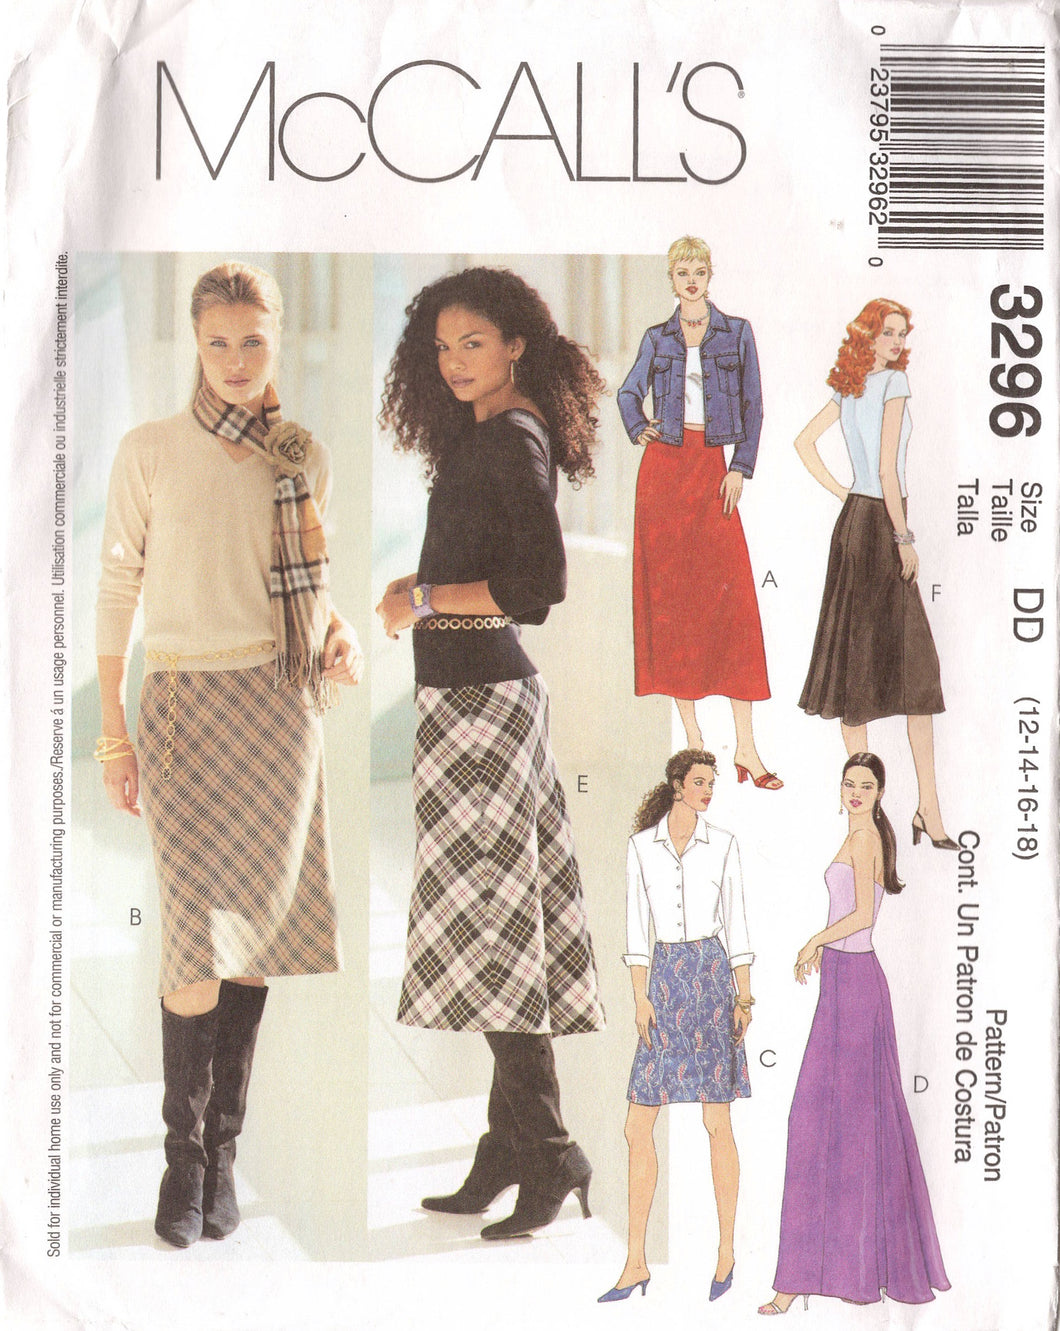 2000's Vogue Bias Cut skirt with Straight or Fishtail Back pattern - Waist 26.5-32